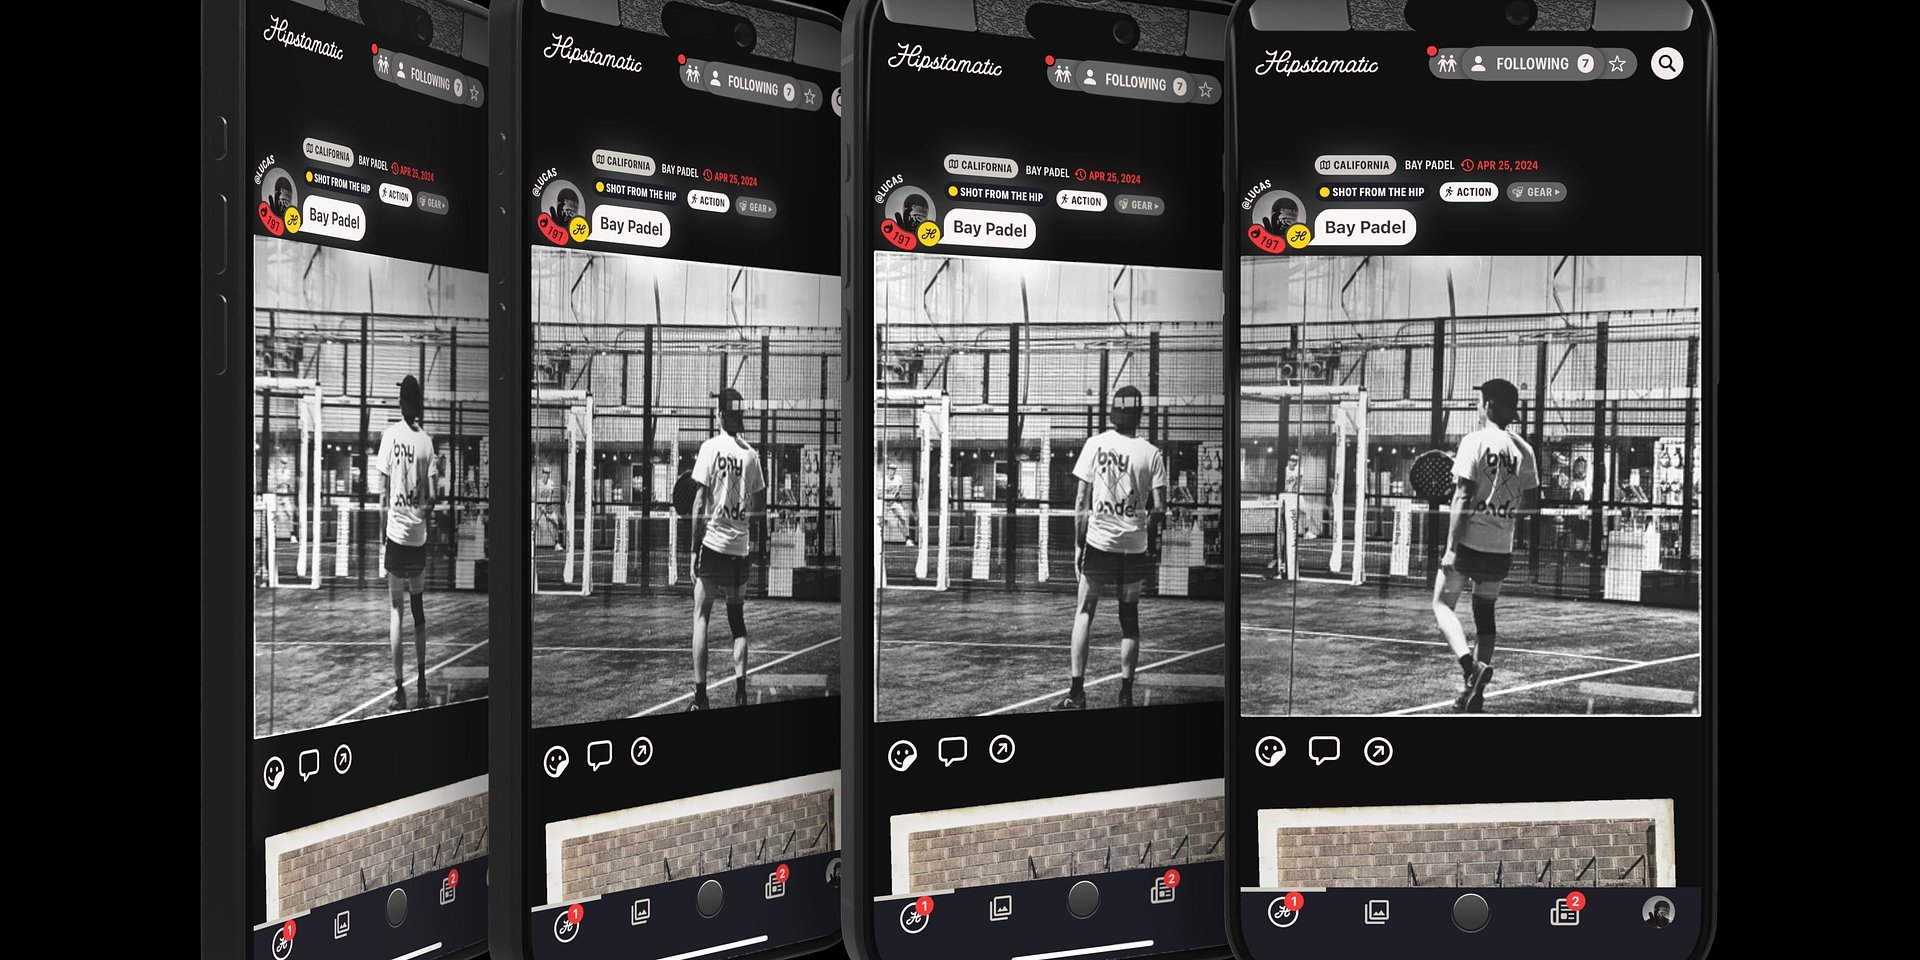 A grid of black-and-white photos on a smartphone screen showing two players in a paddle tennis match from various angles. each photo has digital interface elements like buttons and icons.